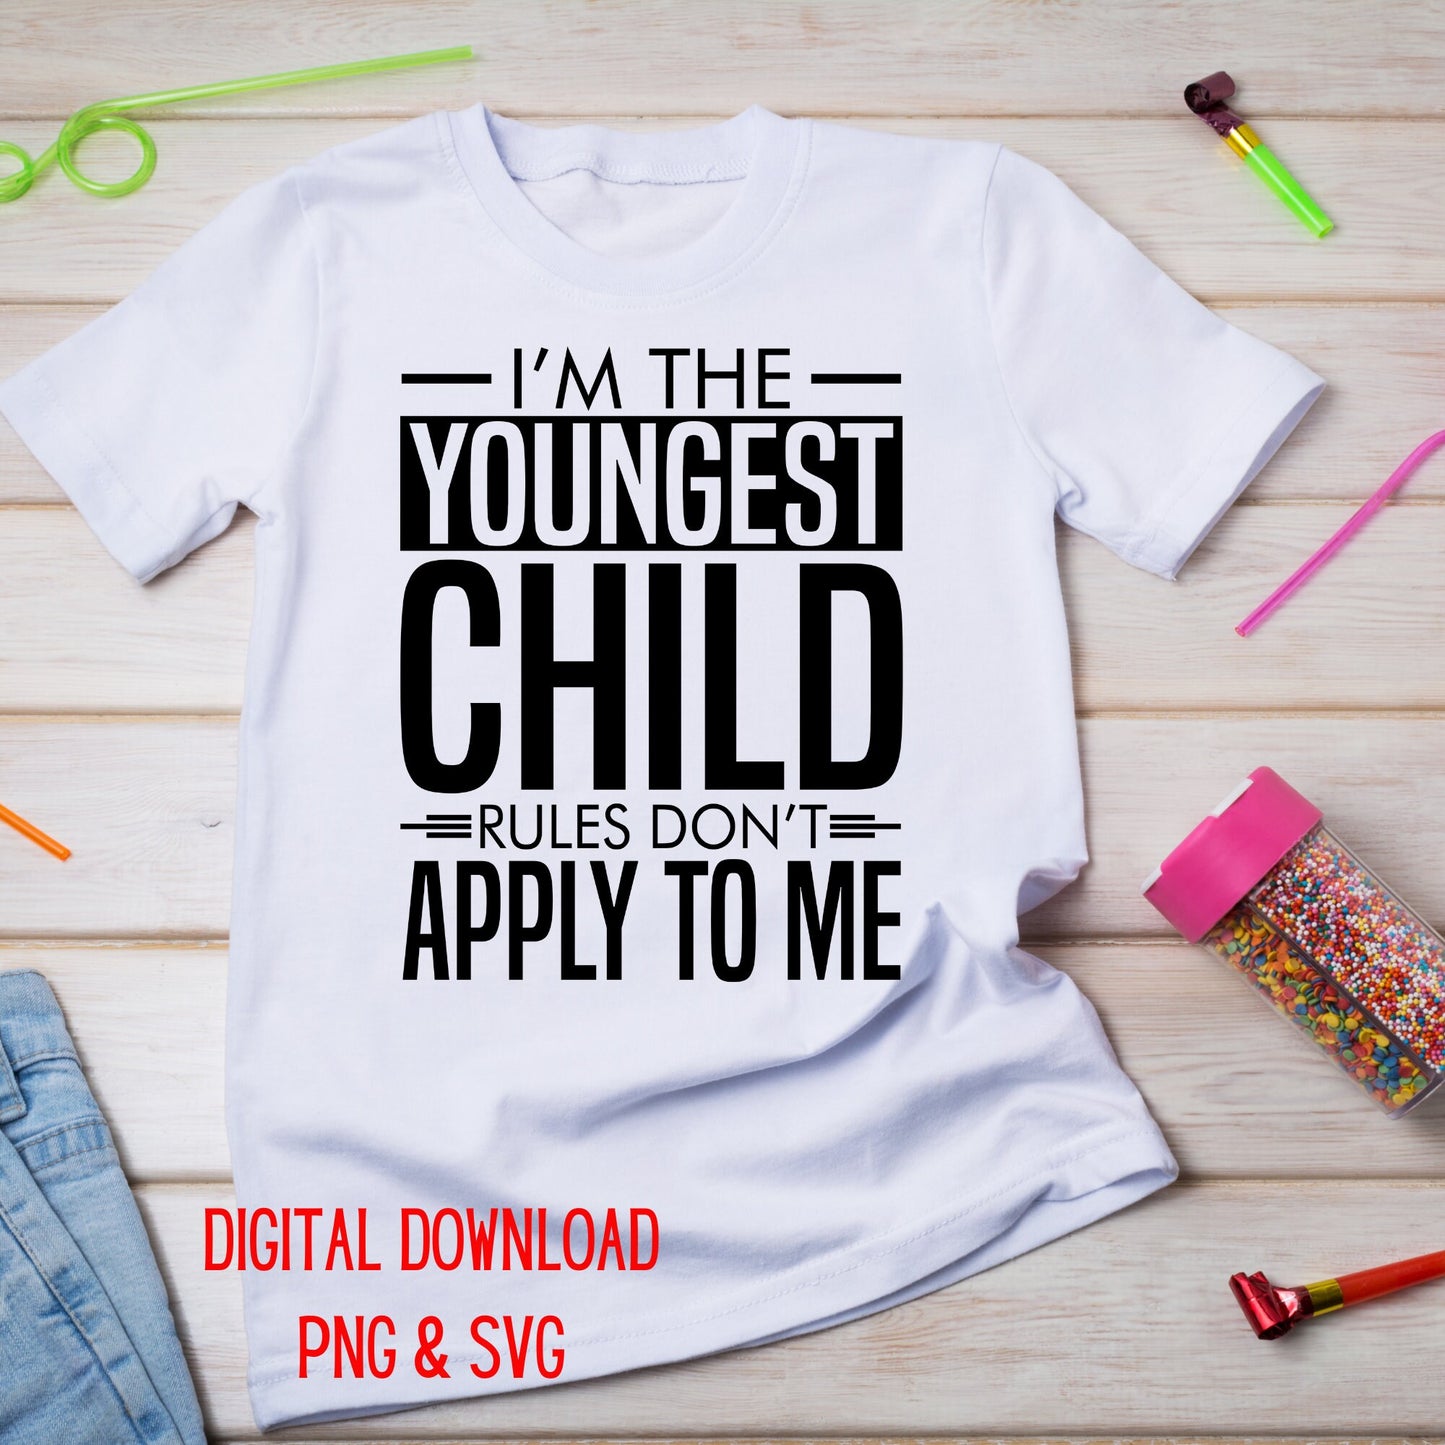 I am the youngest